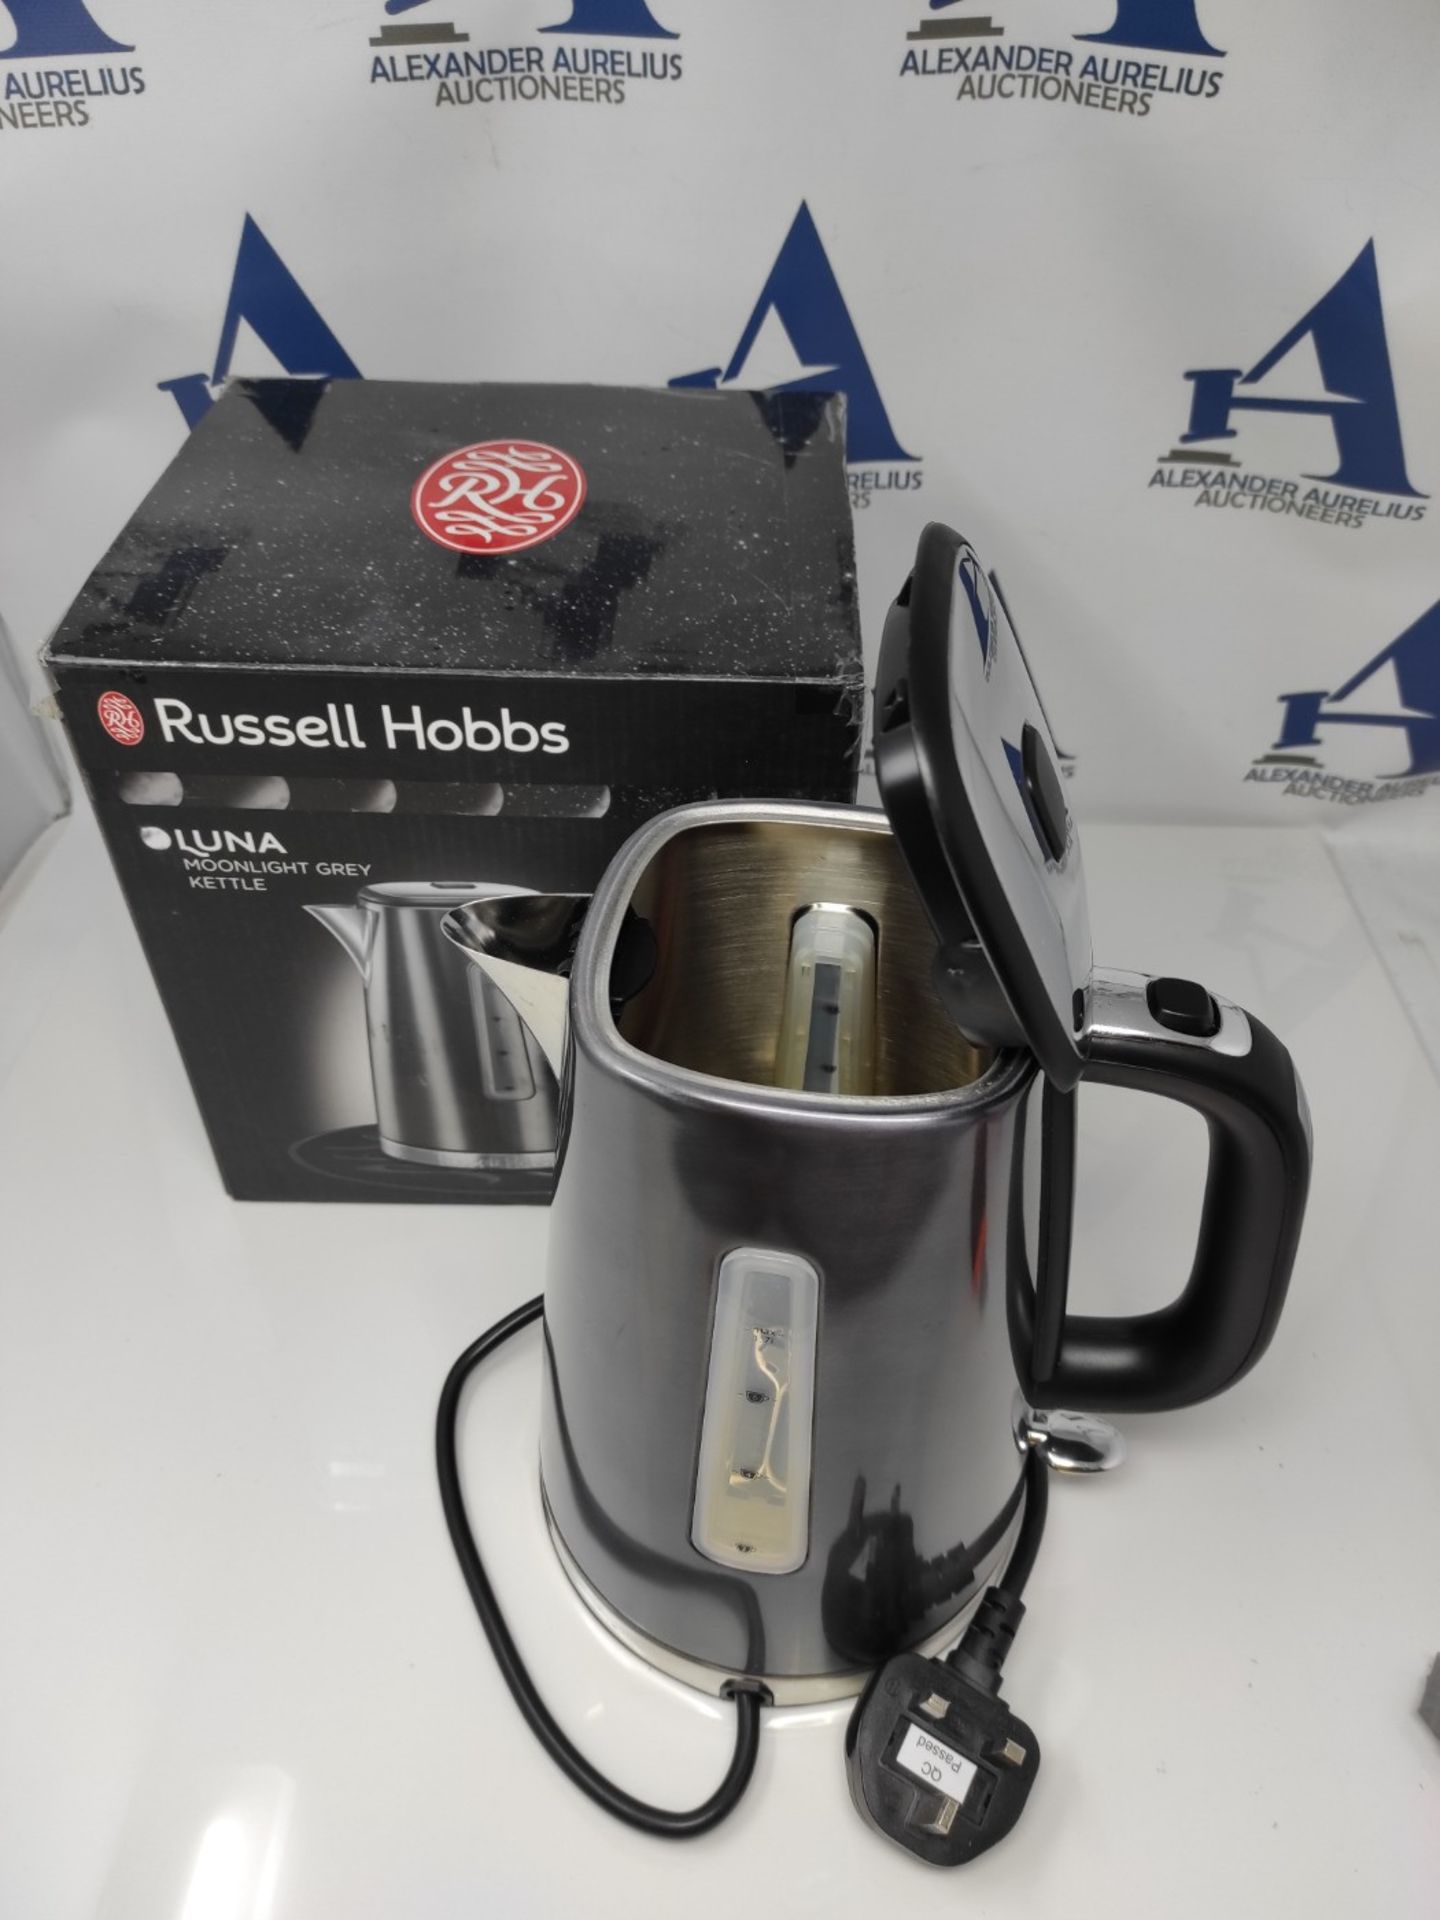 Russell Hobbs 23211 Luna Quiet Boil Electric Kettle, Stainless Steel, 3000 W, 1.7 Litr - Image 2 of 2